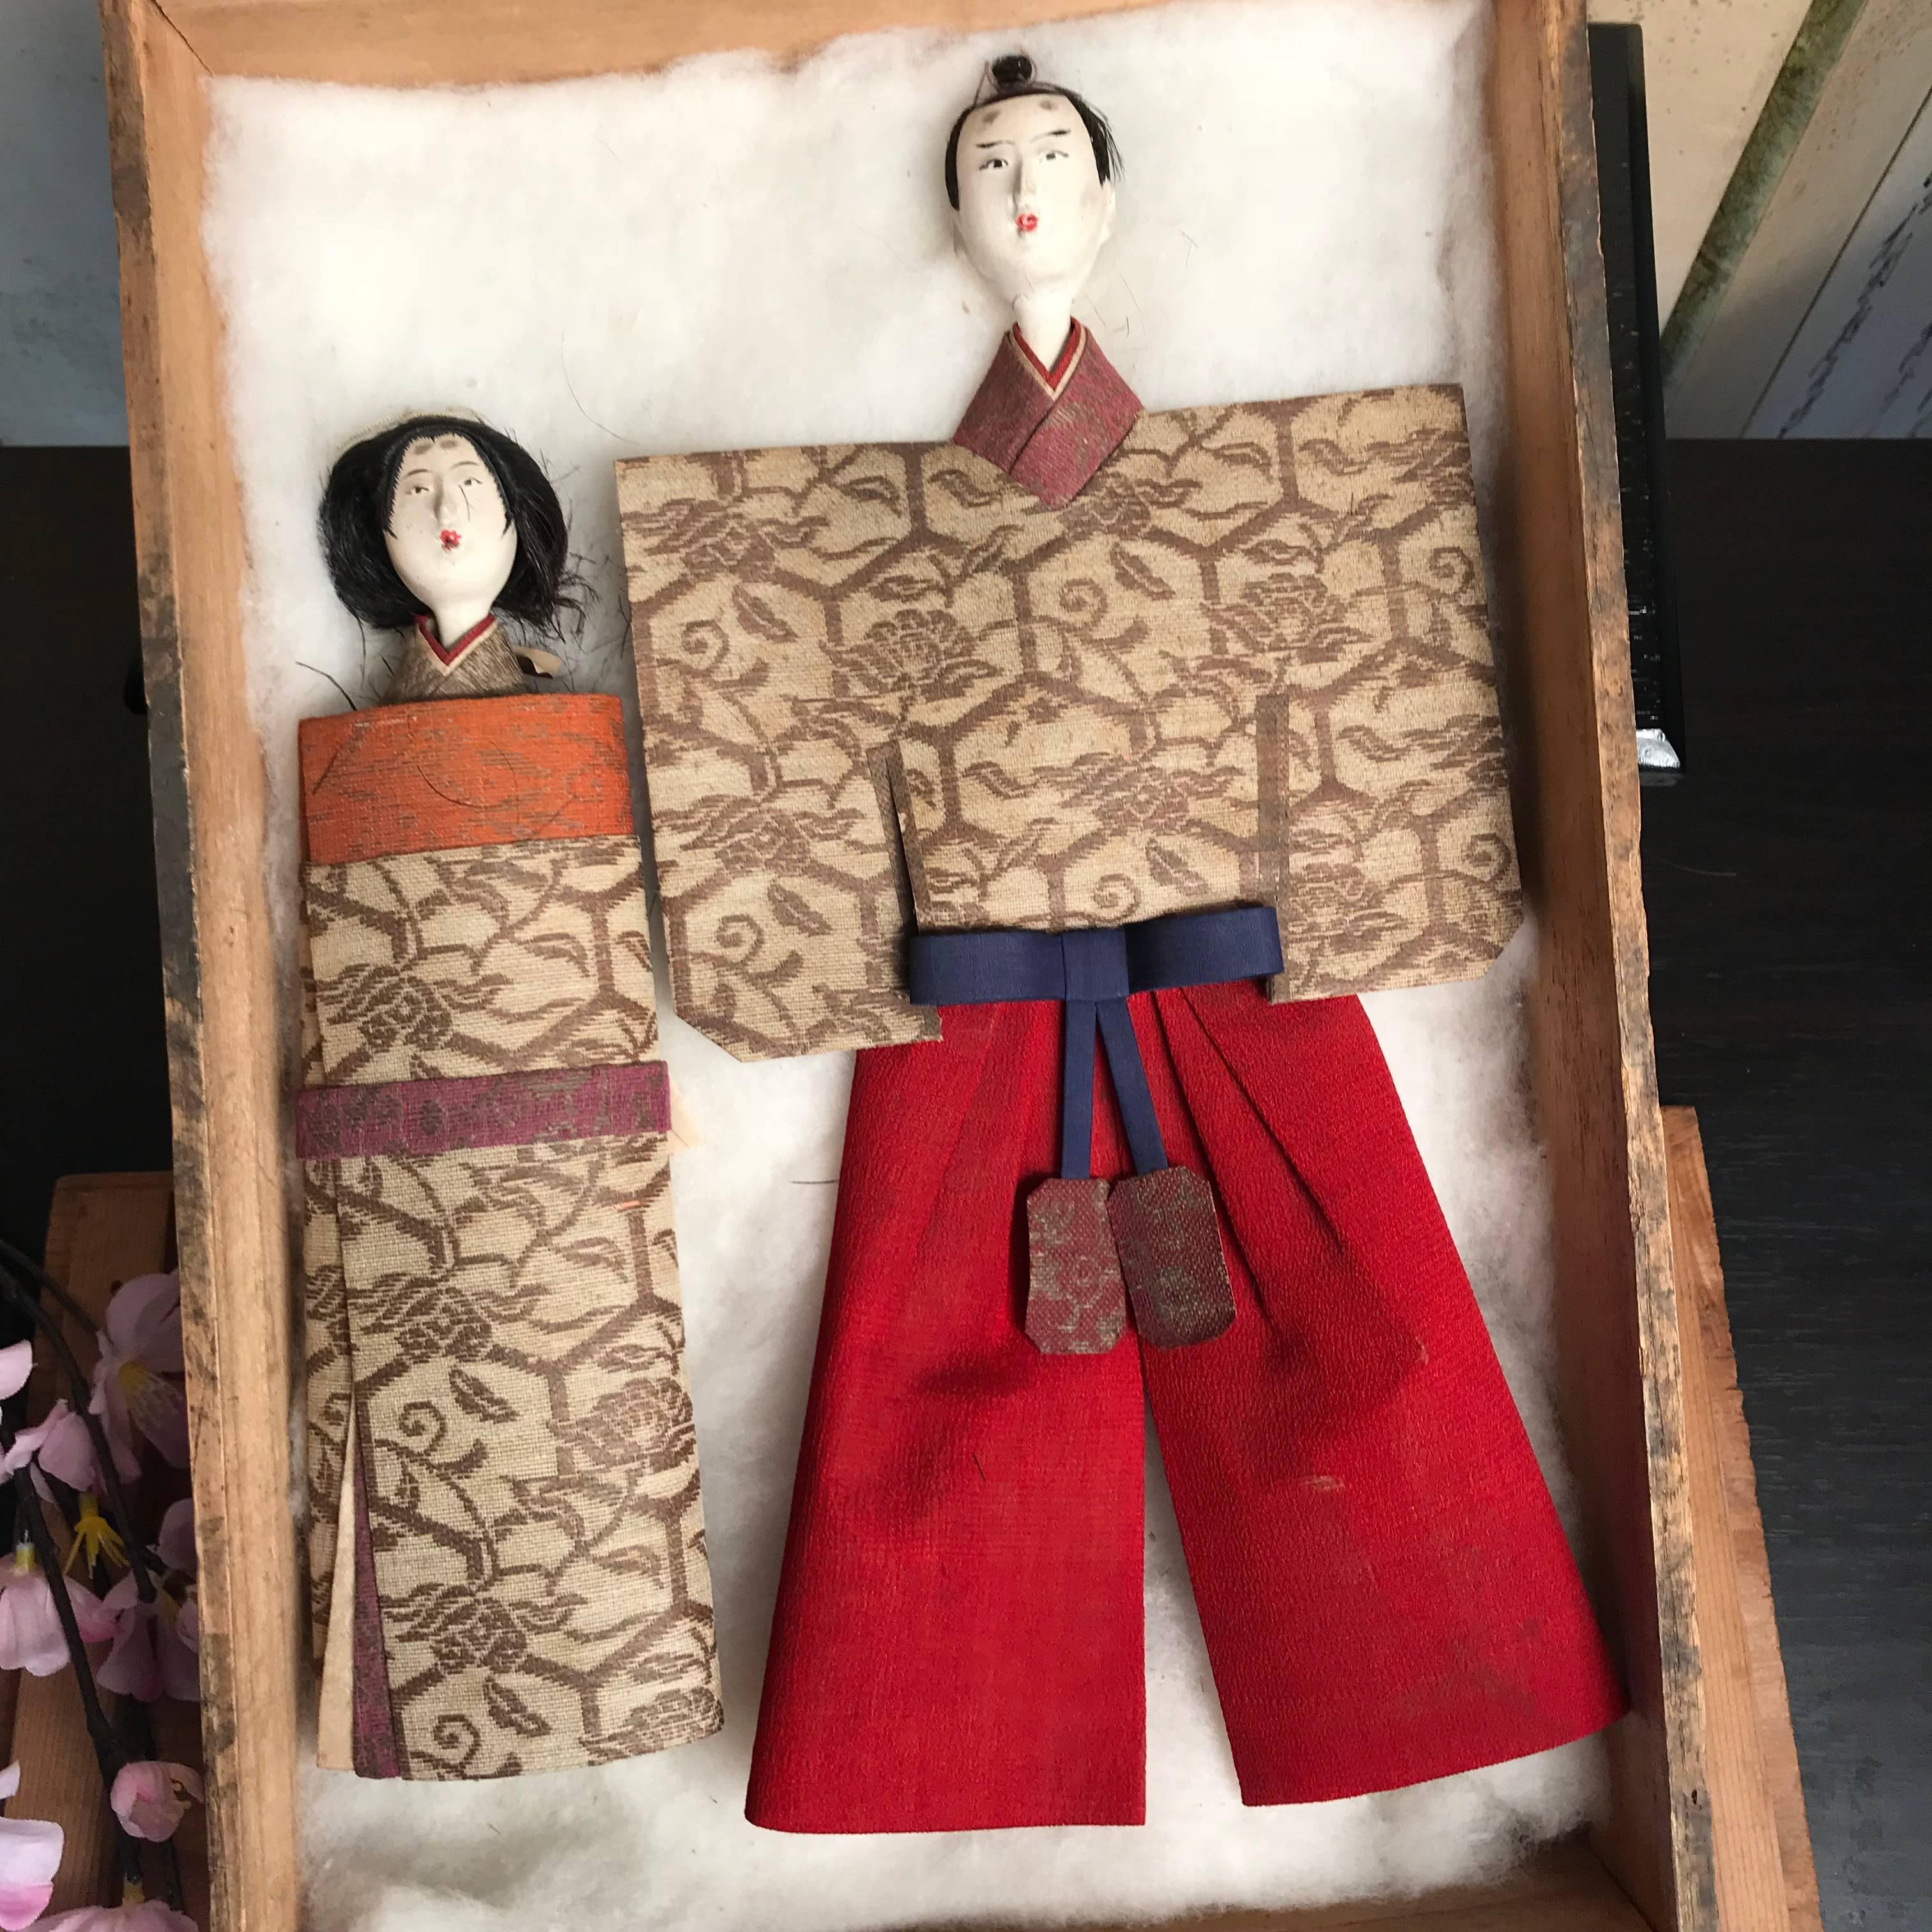 From our recent Japanese acquisitions 

A rare couple.

These Japanese Tachibina dolls represent the simplest essential form of the imperial couple. Their beautiful faces were crafted from crushed shell called gofun coated over carved wood and their